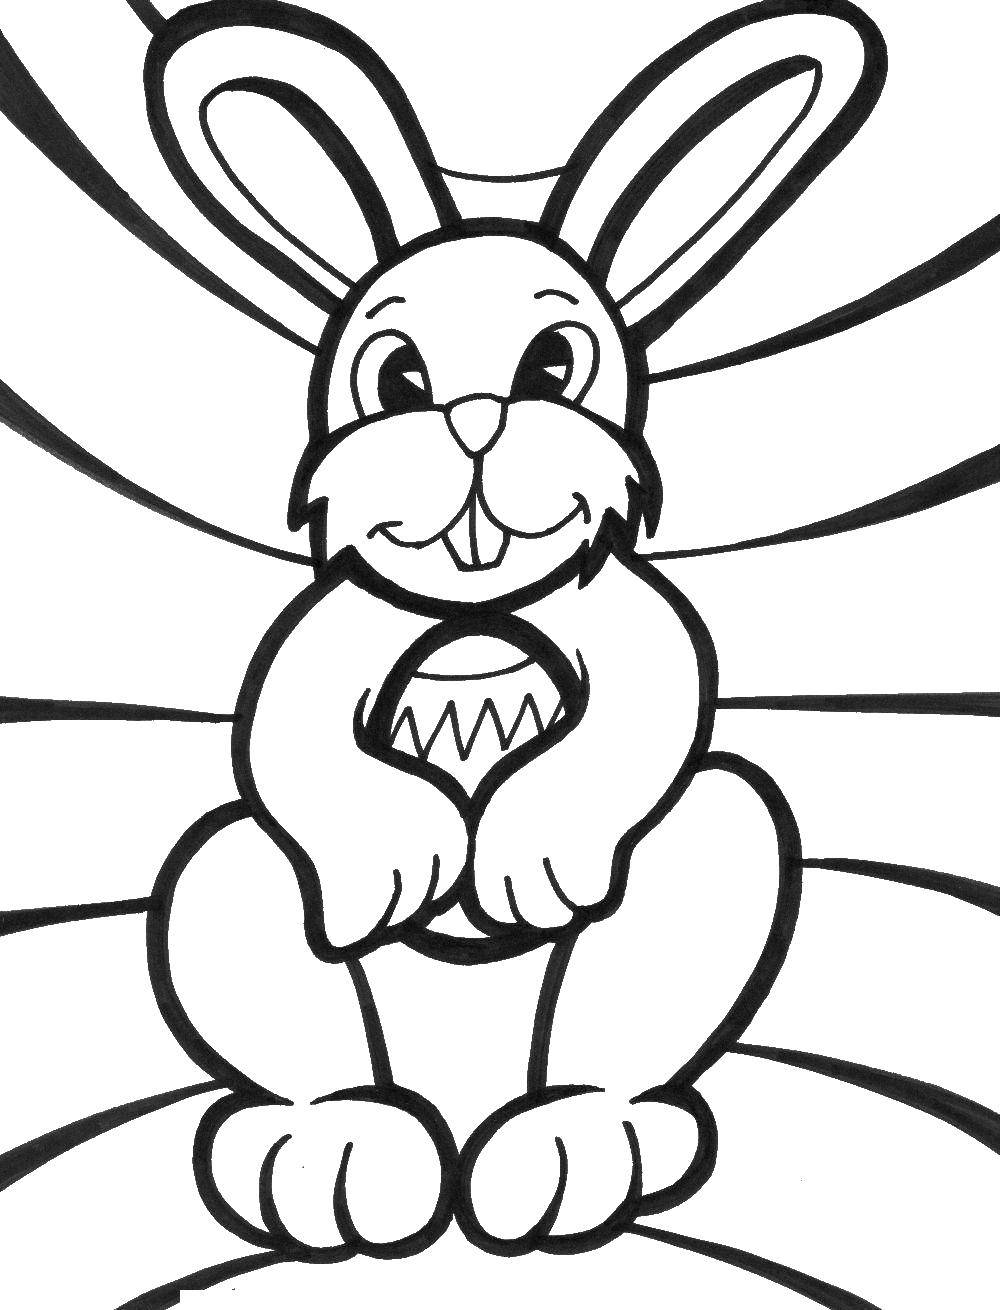 Coloring Easter Bunny with eggs. Category Easter. Tags:  Easter, eggs, rabbit.